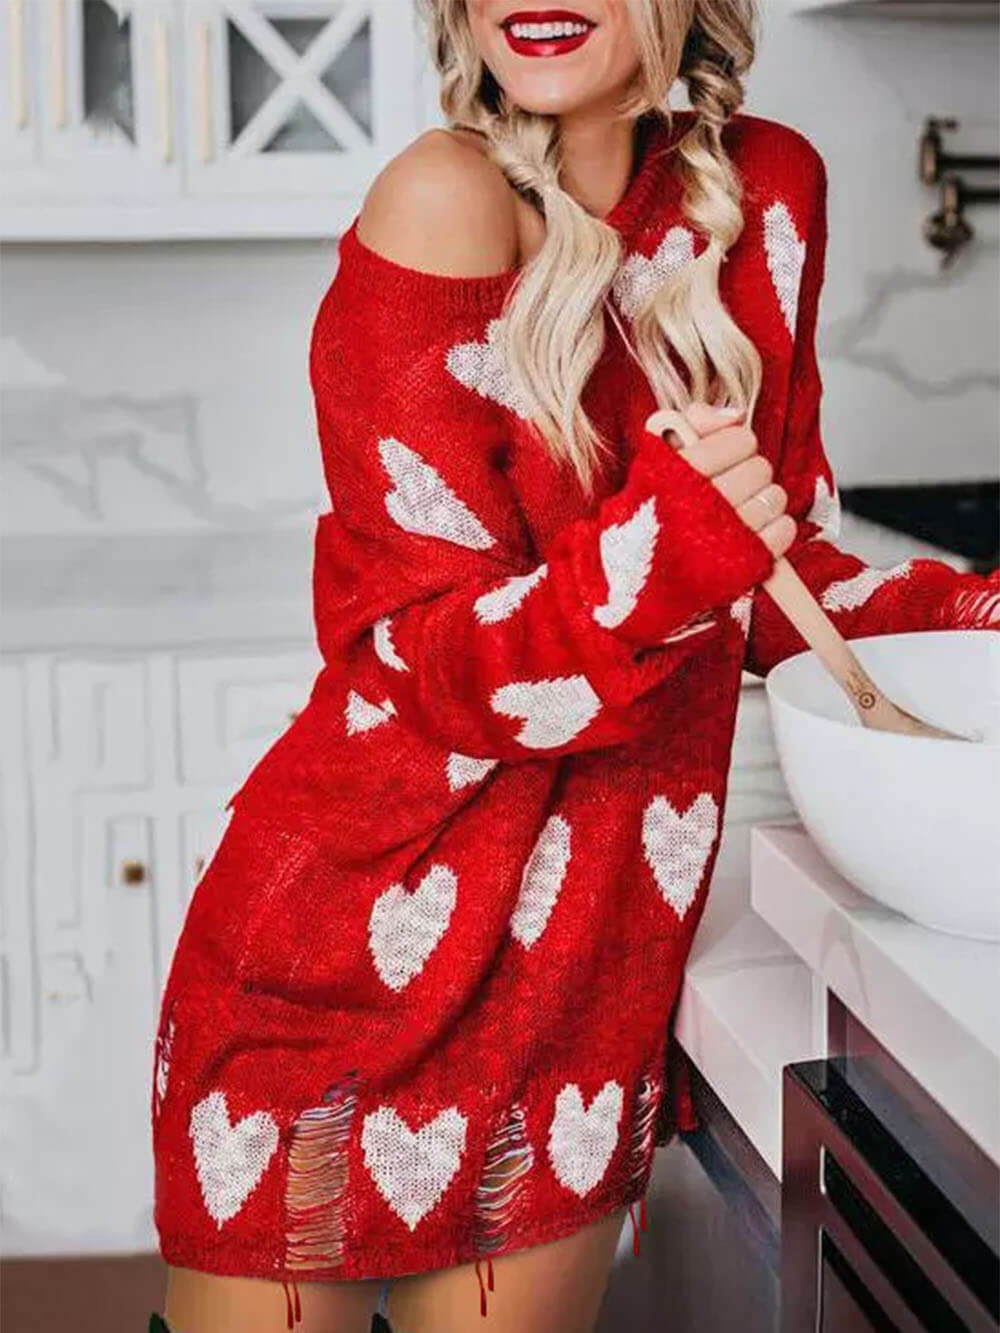 Hollow Out Hole Heart Sweater Dress